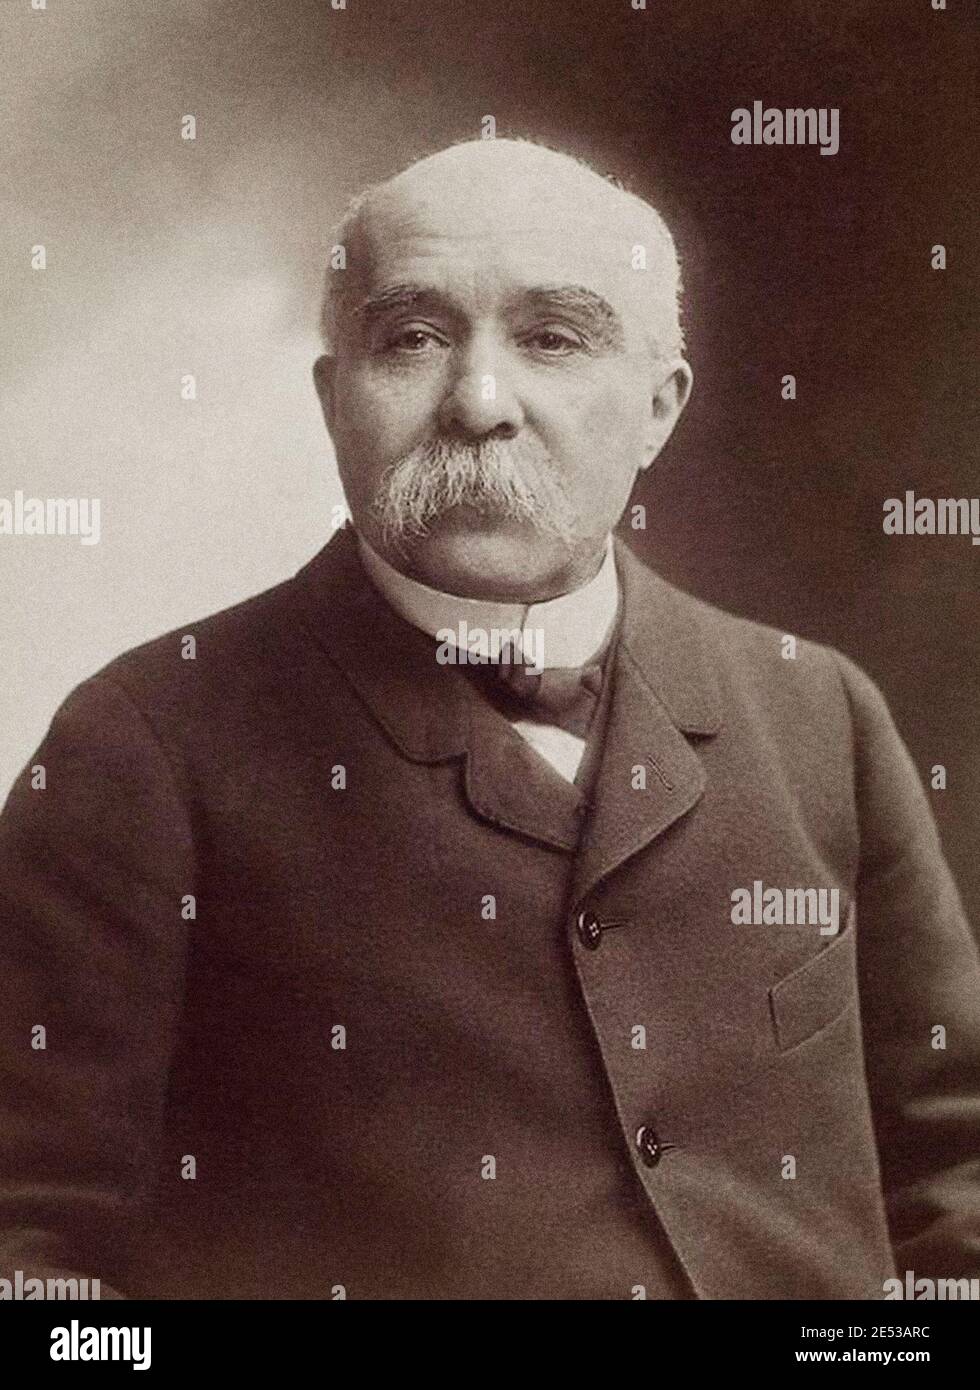 Georges Benjamin Clemenceau (1841 — 1929) — French politician, statesman and journalist, who served as Prime Minister of France from 1906 to 1909 and Stock Photo